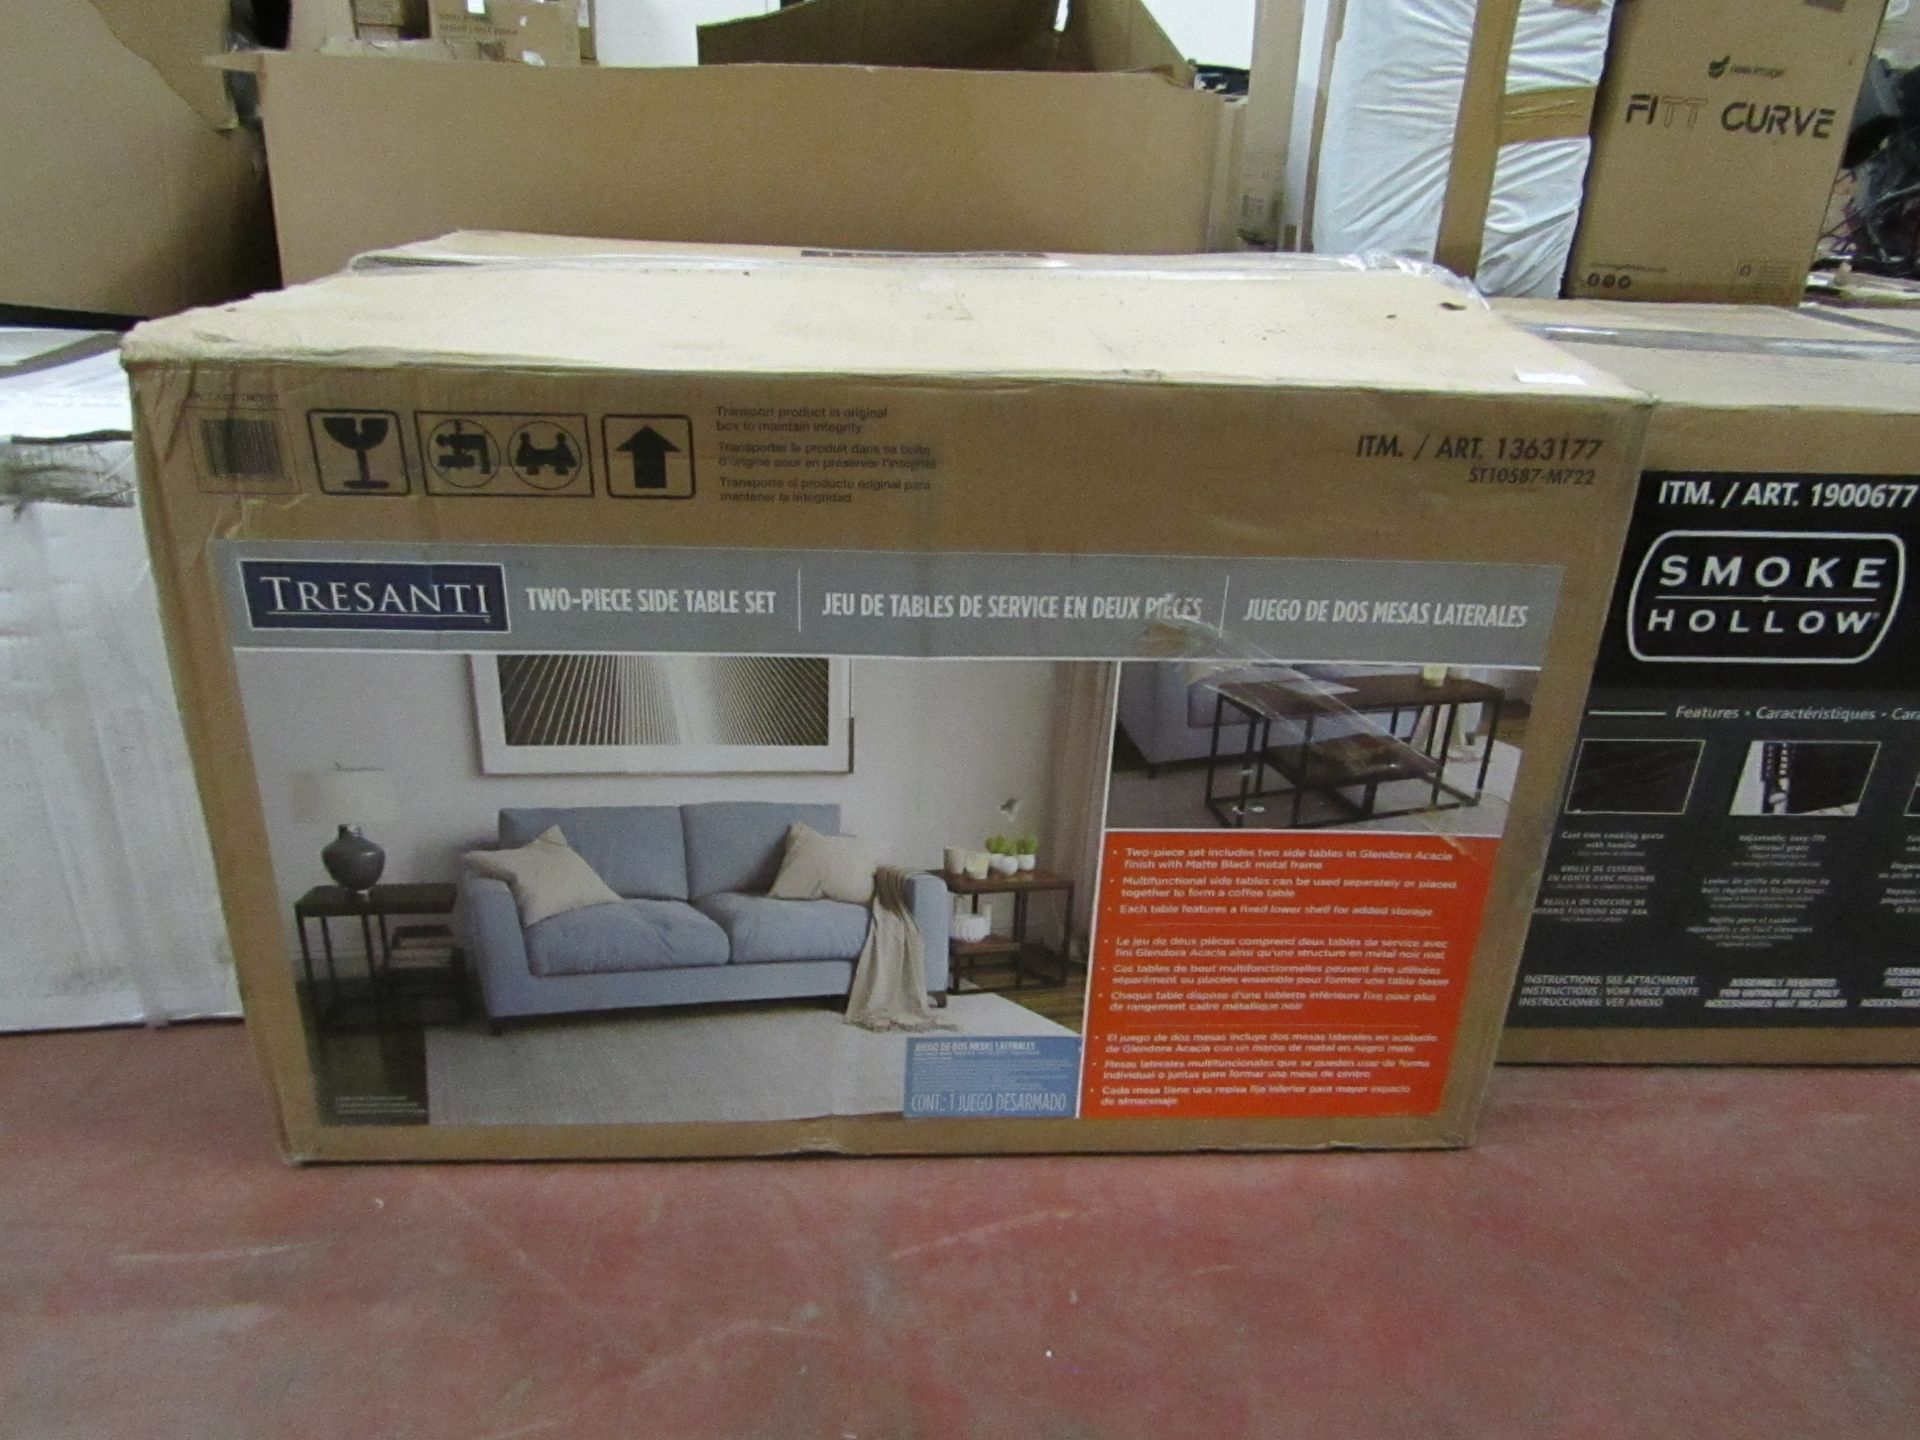 Tresanti - Two Piece Side Table Set - Unchecked & Boxed. RRP £119.99 @ Costco.